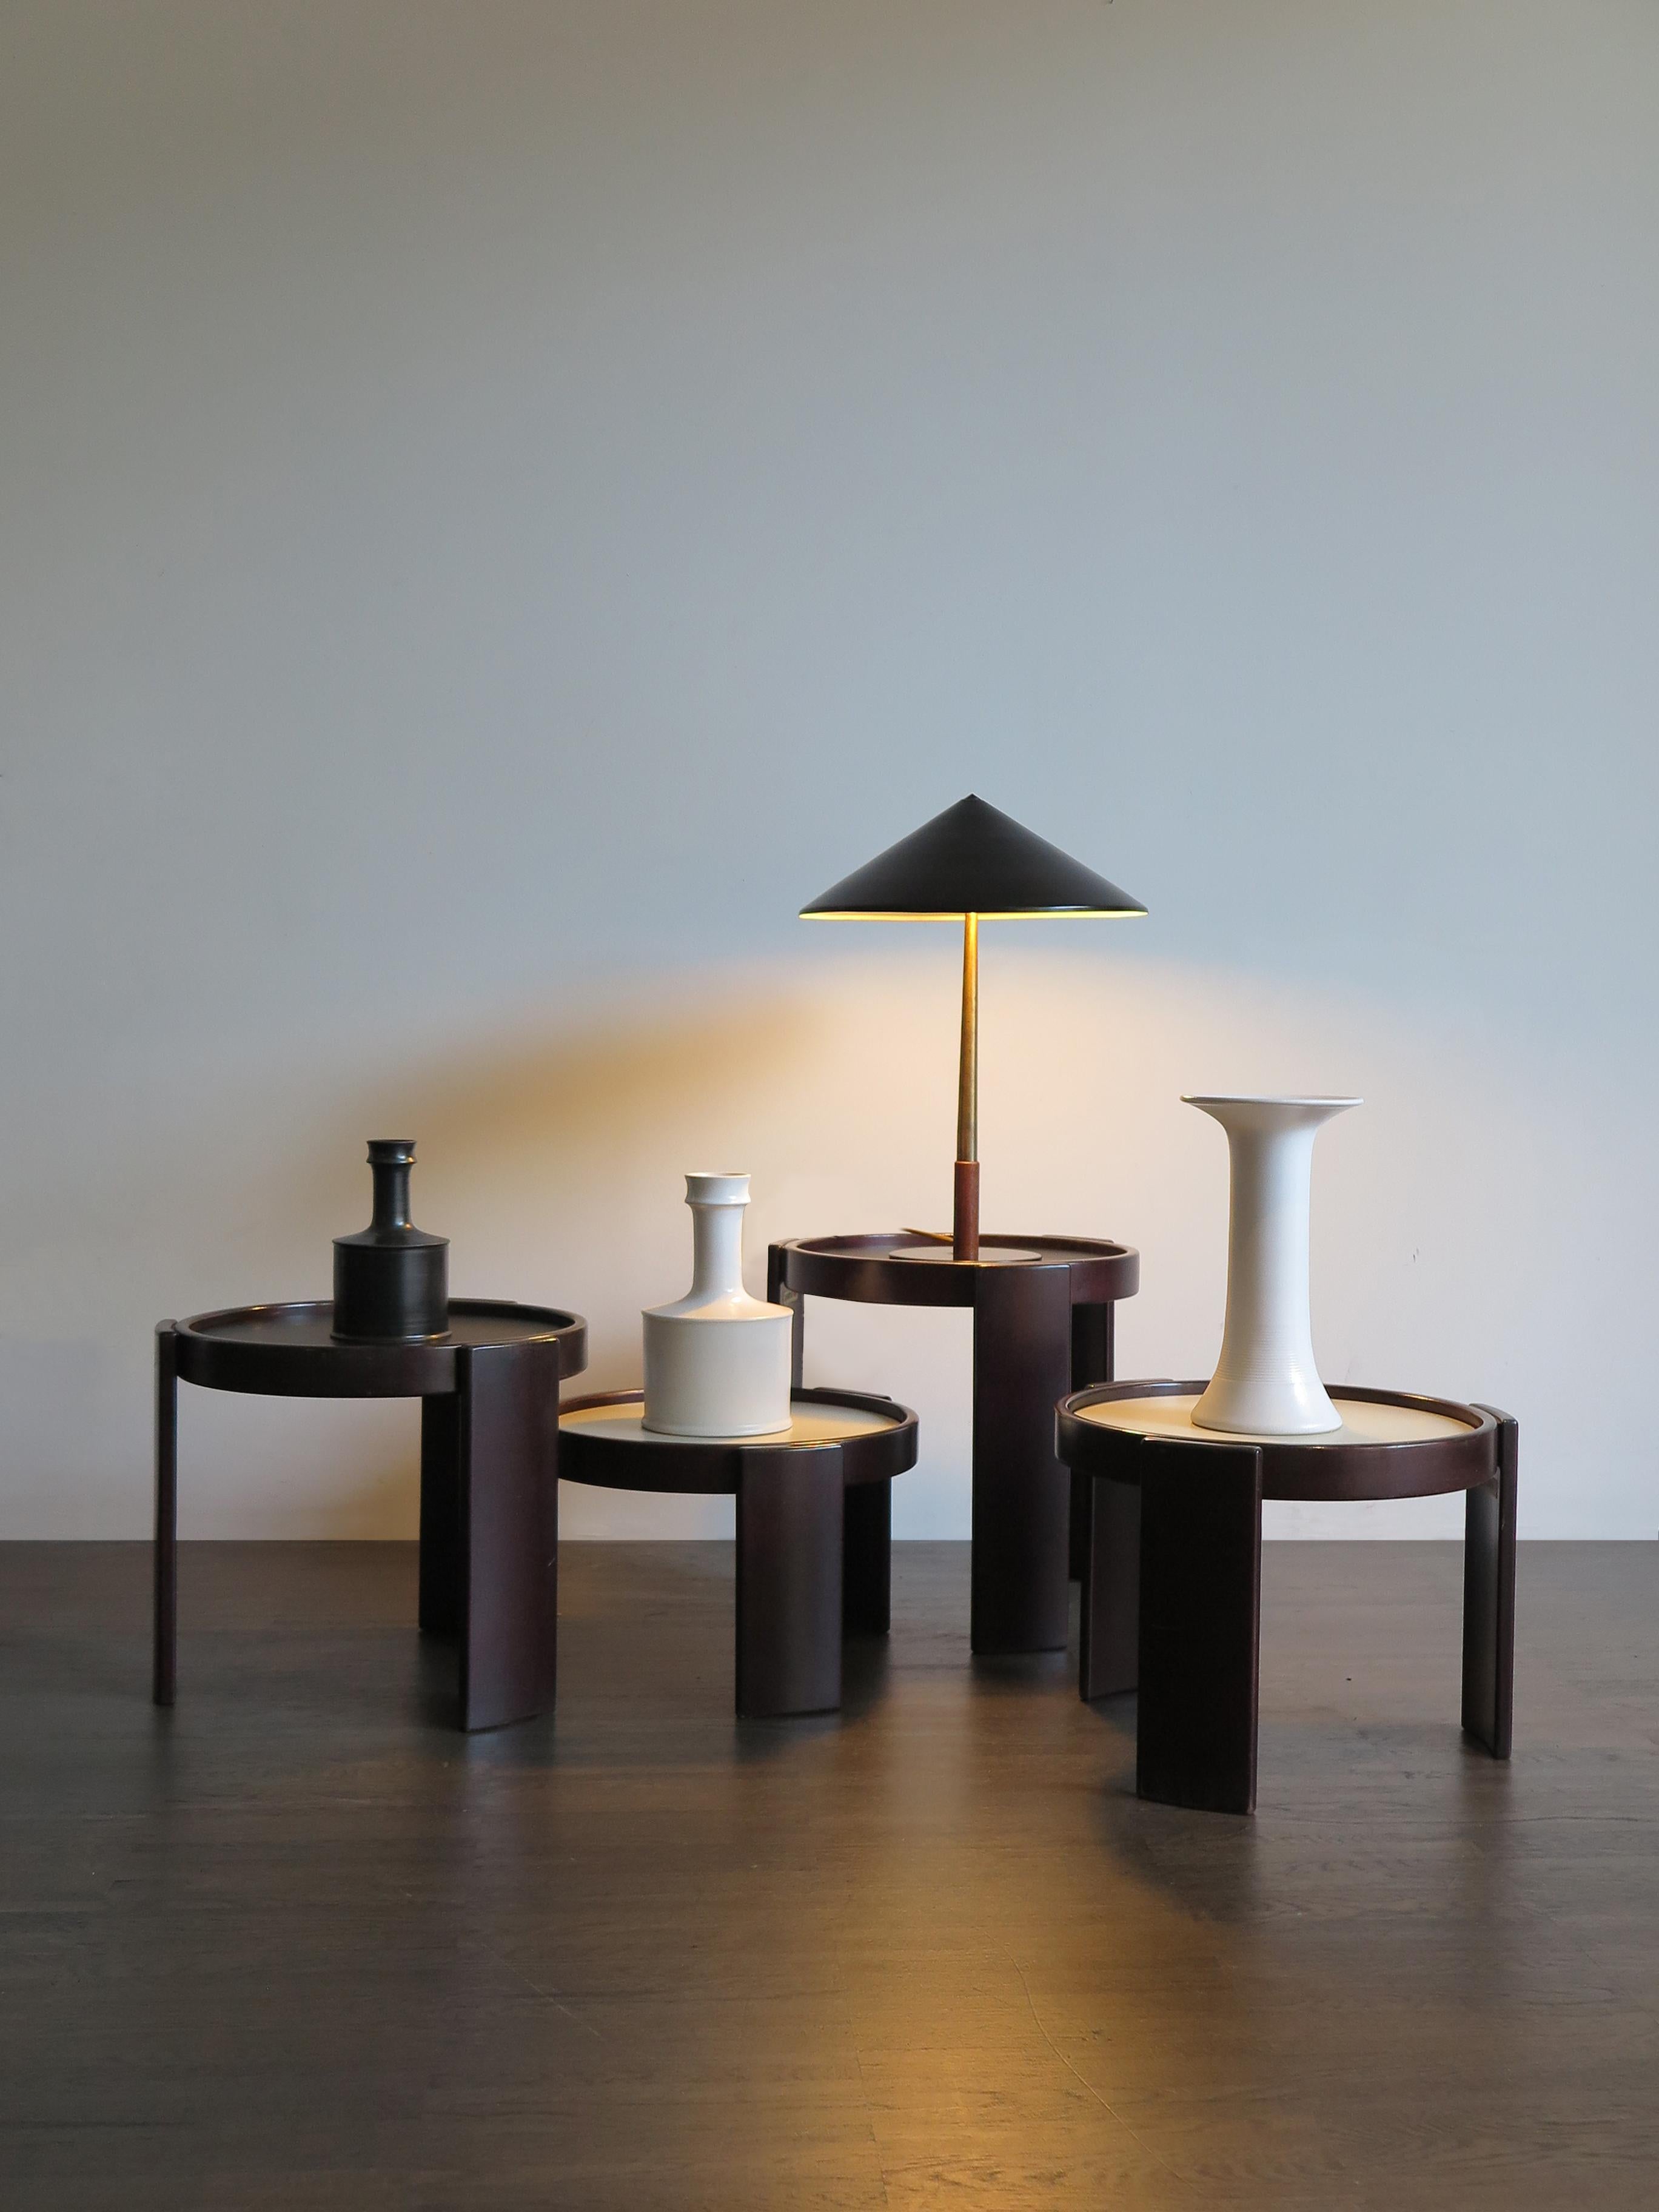 Set of four Italian Mid-Century Modern design stackable nesting tables designed by Gianfranco Frattini and produced by Cassina, with reversible black and white tops and wooden structure, manufacturer’s label on all tables, circa 1960s.
Very good